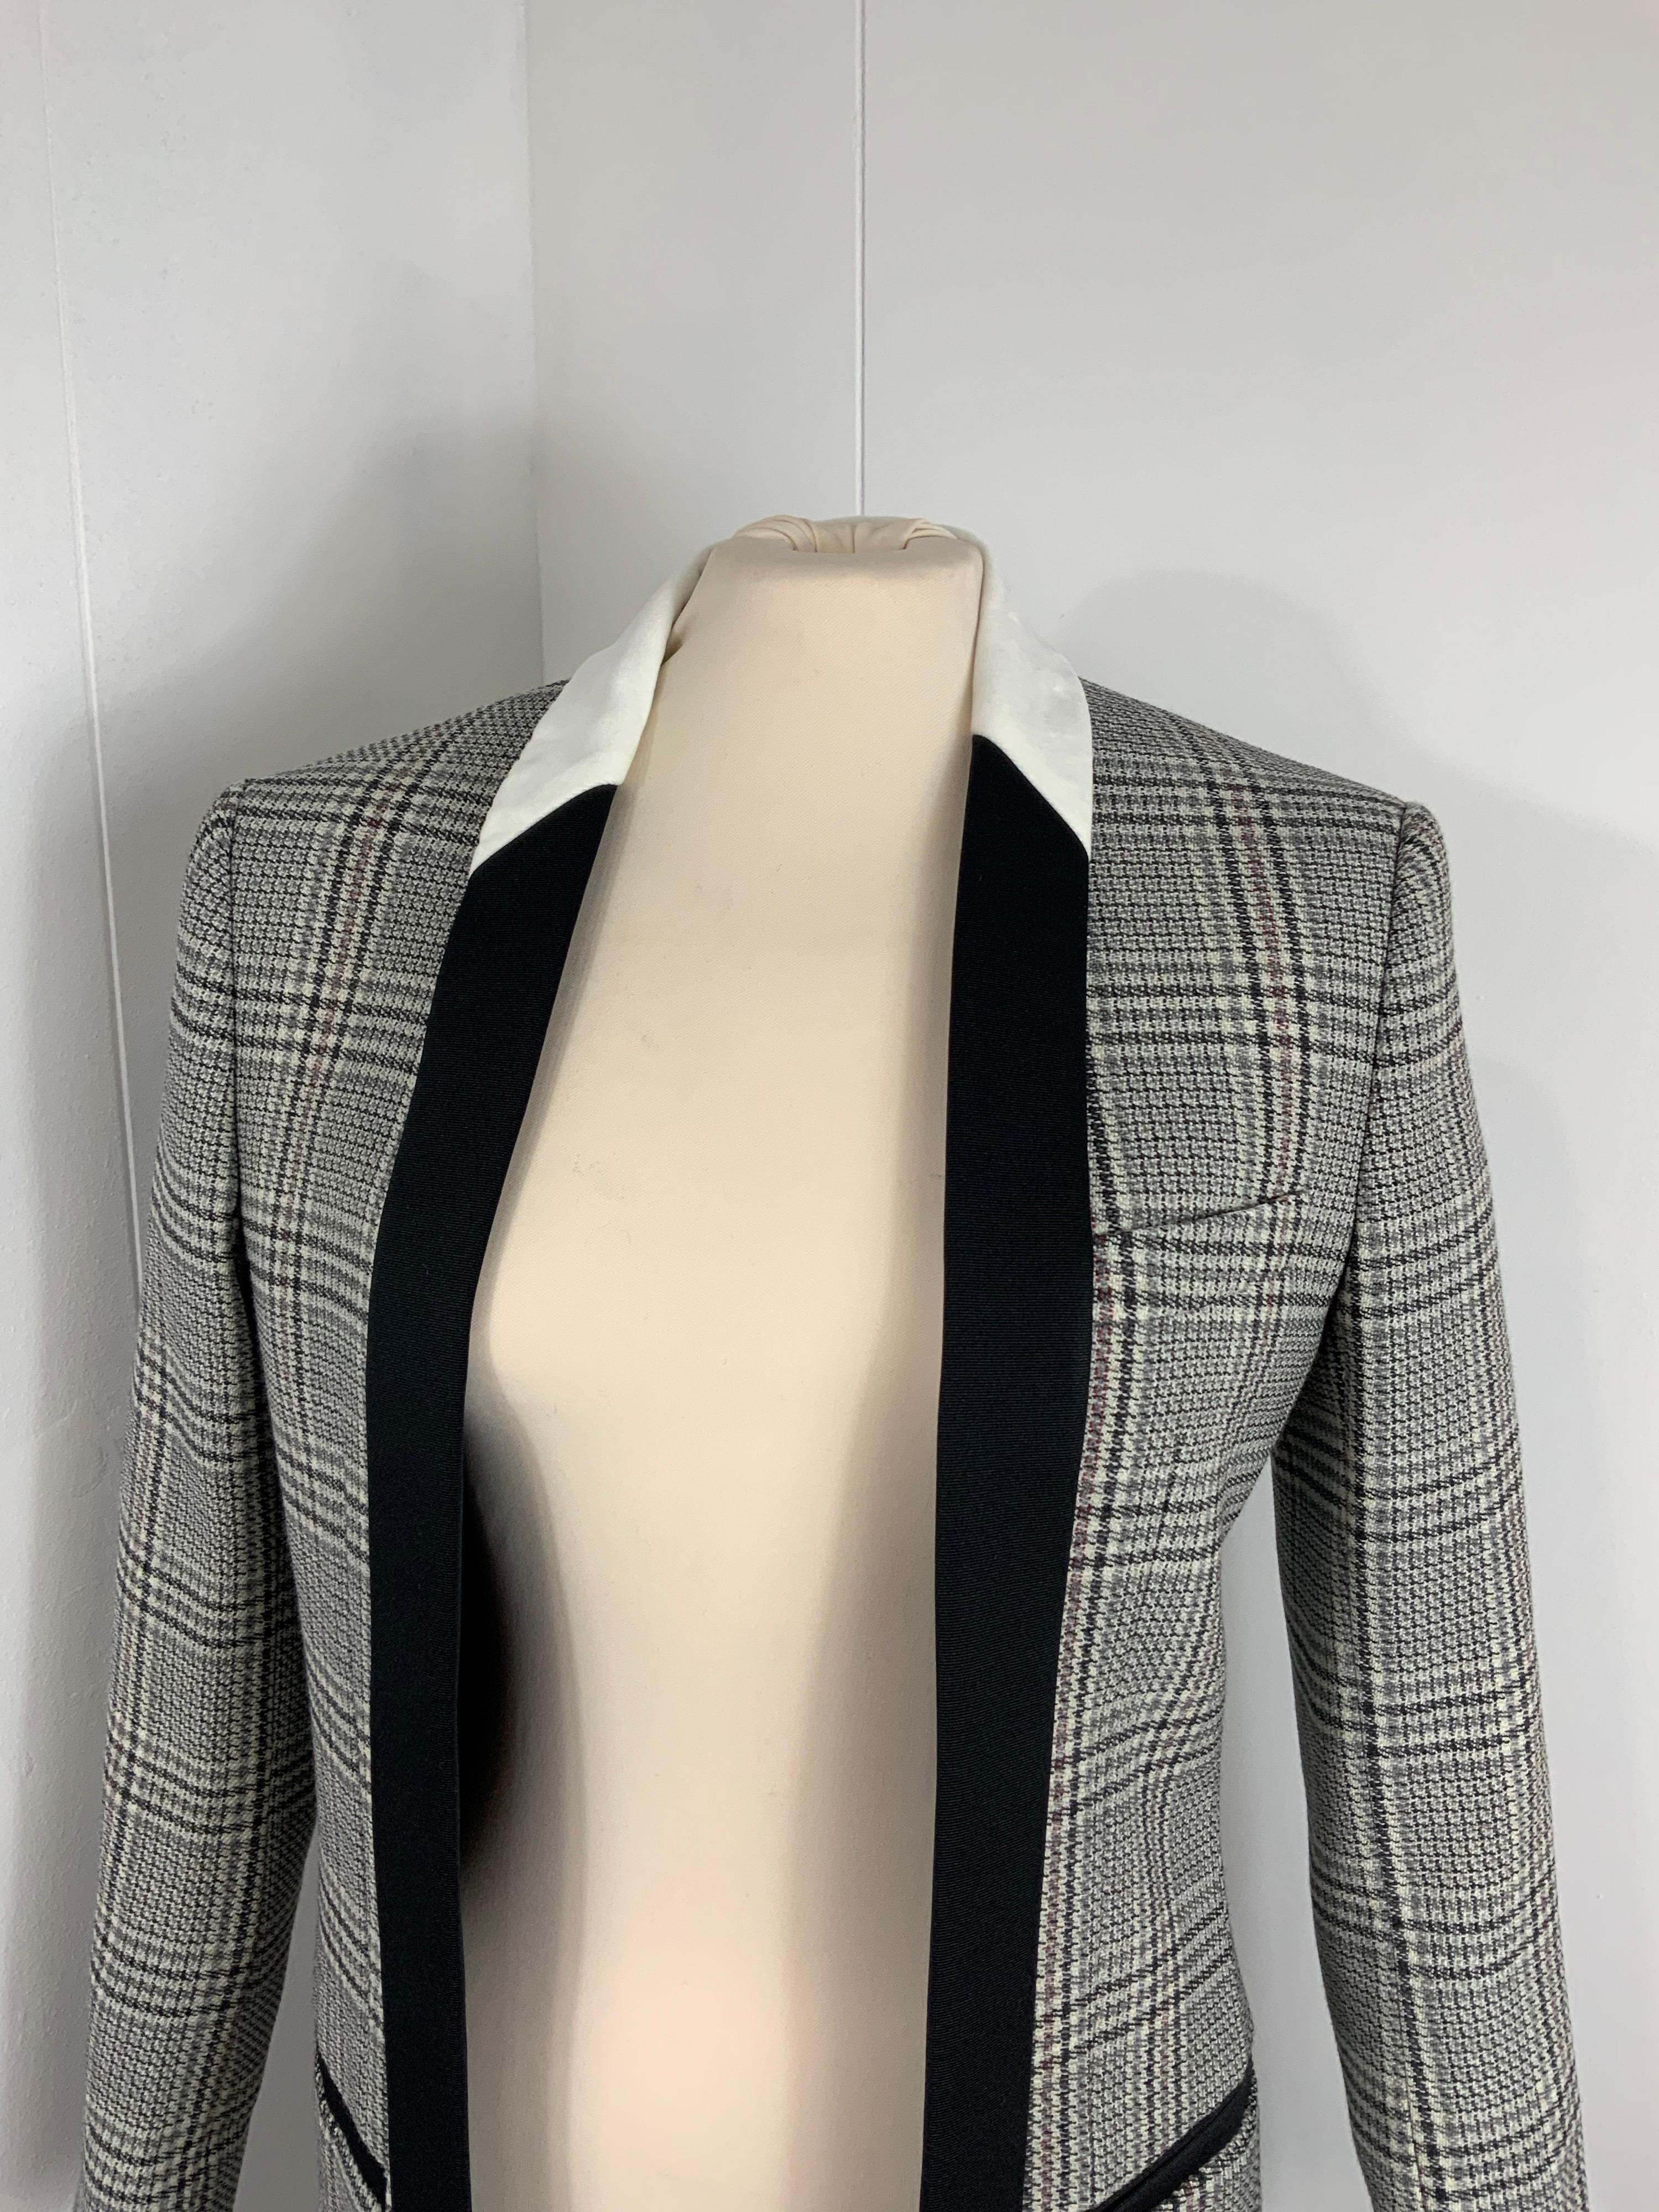 Louis Vuitton Coat.
The composition tag is missing.
We think is wool with cotton & velvet details.
Fully lined.
Size 34 FR. it fits an 38 Italian.
Shoulders 40 cm
Bust 42 cm
Length 93 cm
Sleeves 60 cm 
Conditions: Good - Previously owned and gently